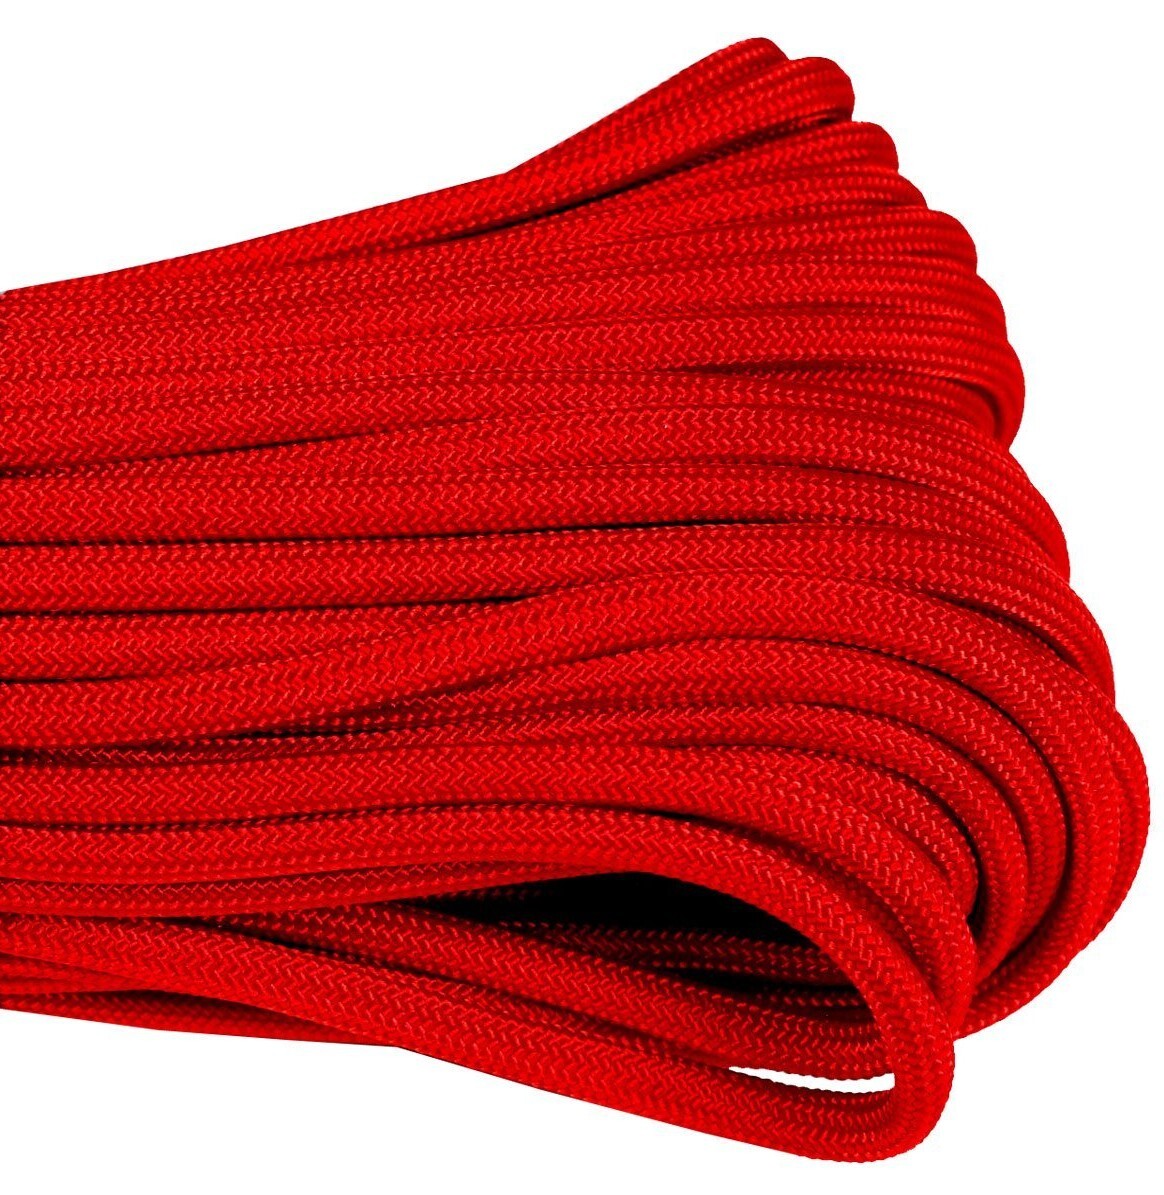 Mil-Spec Red Paracord 550 (100ft) MADE IN USA